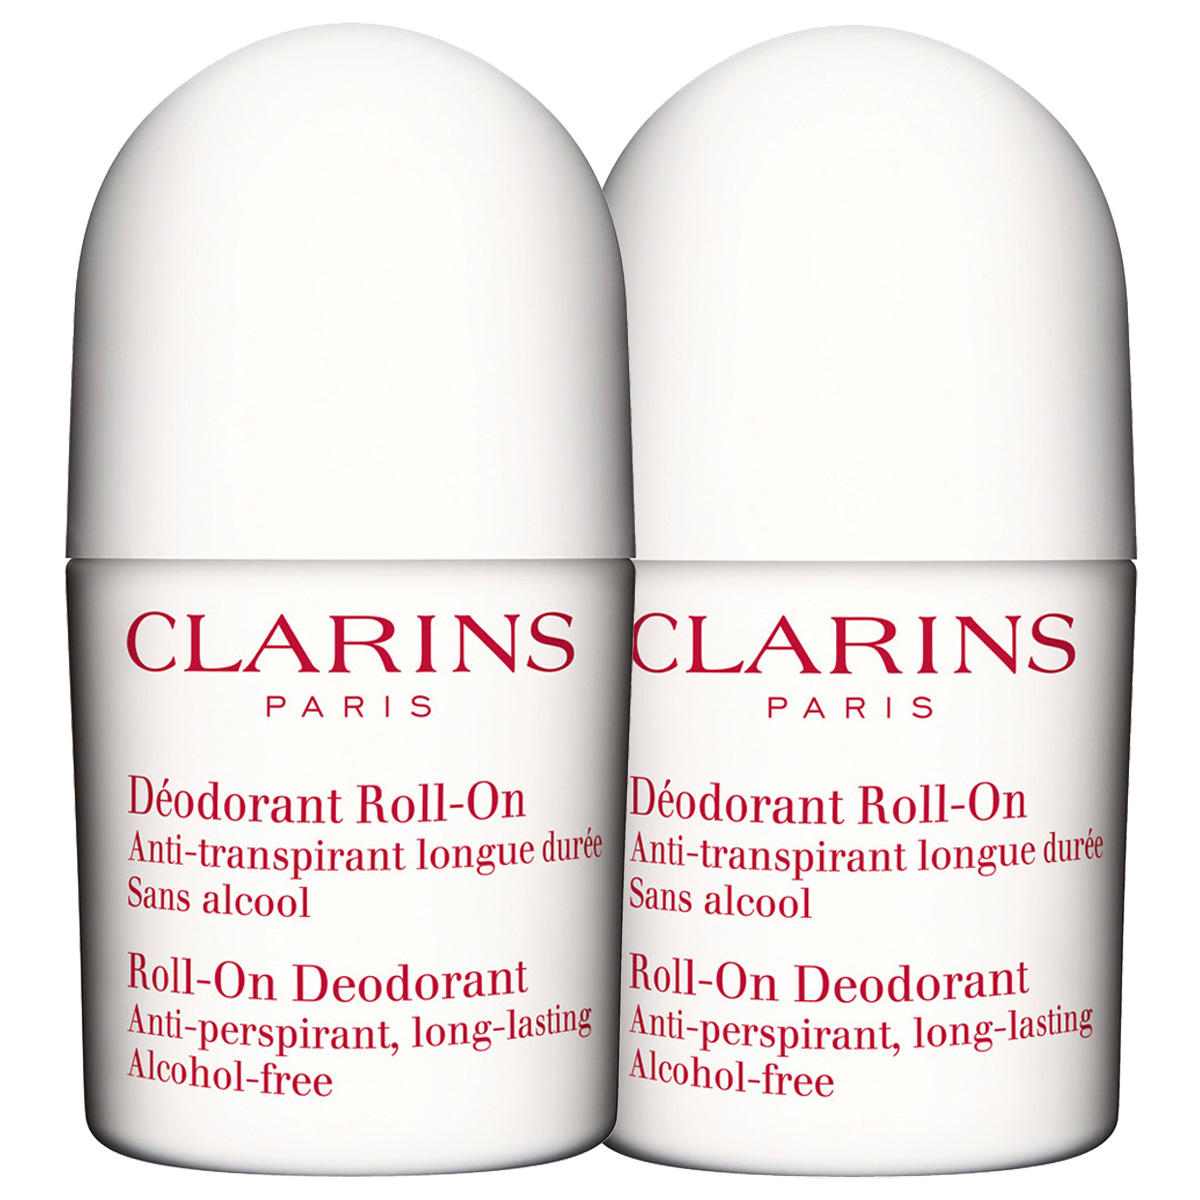 CLARINS Deo Duo Set 100 ml - 1